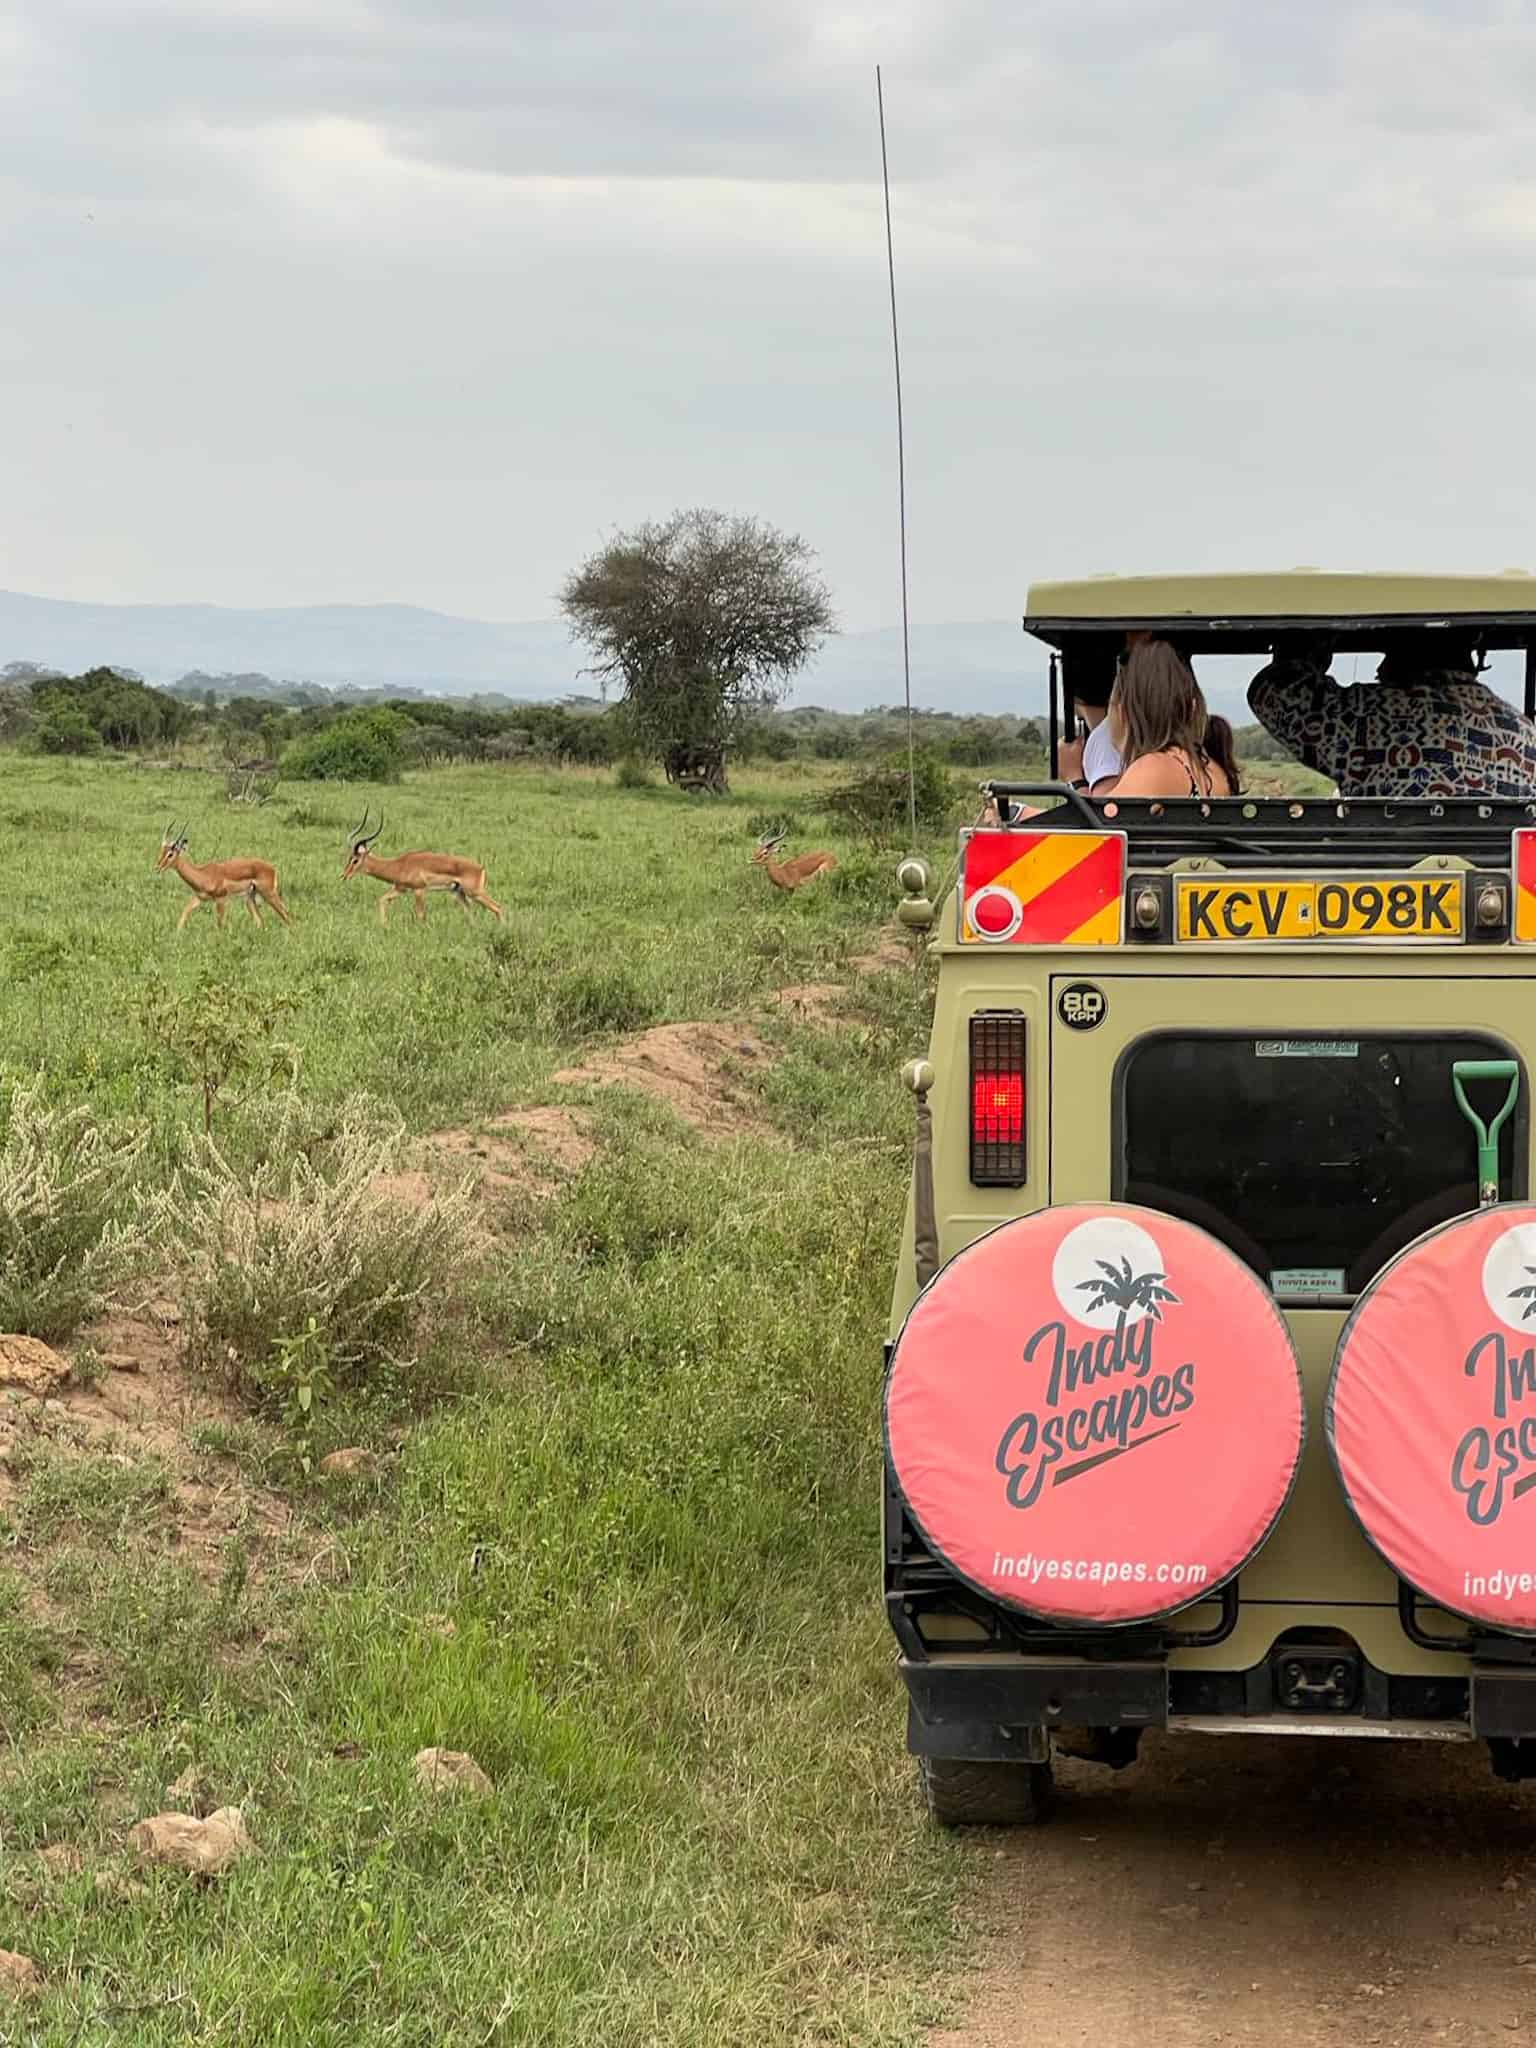 Indy Escapes jeep in a National Park in Kenya